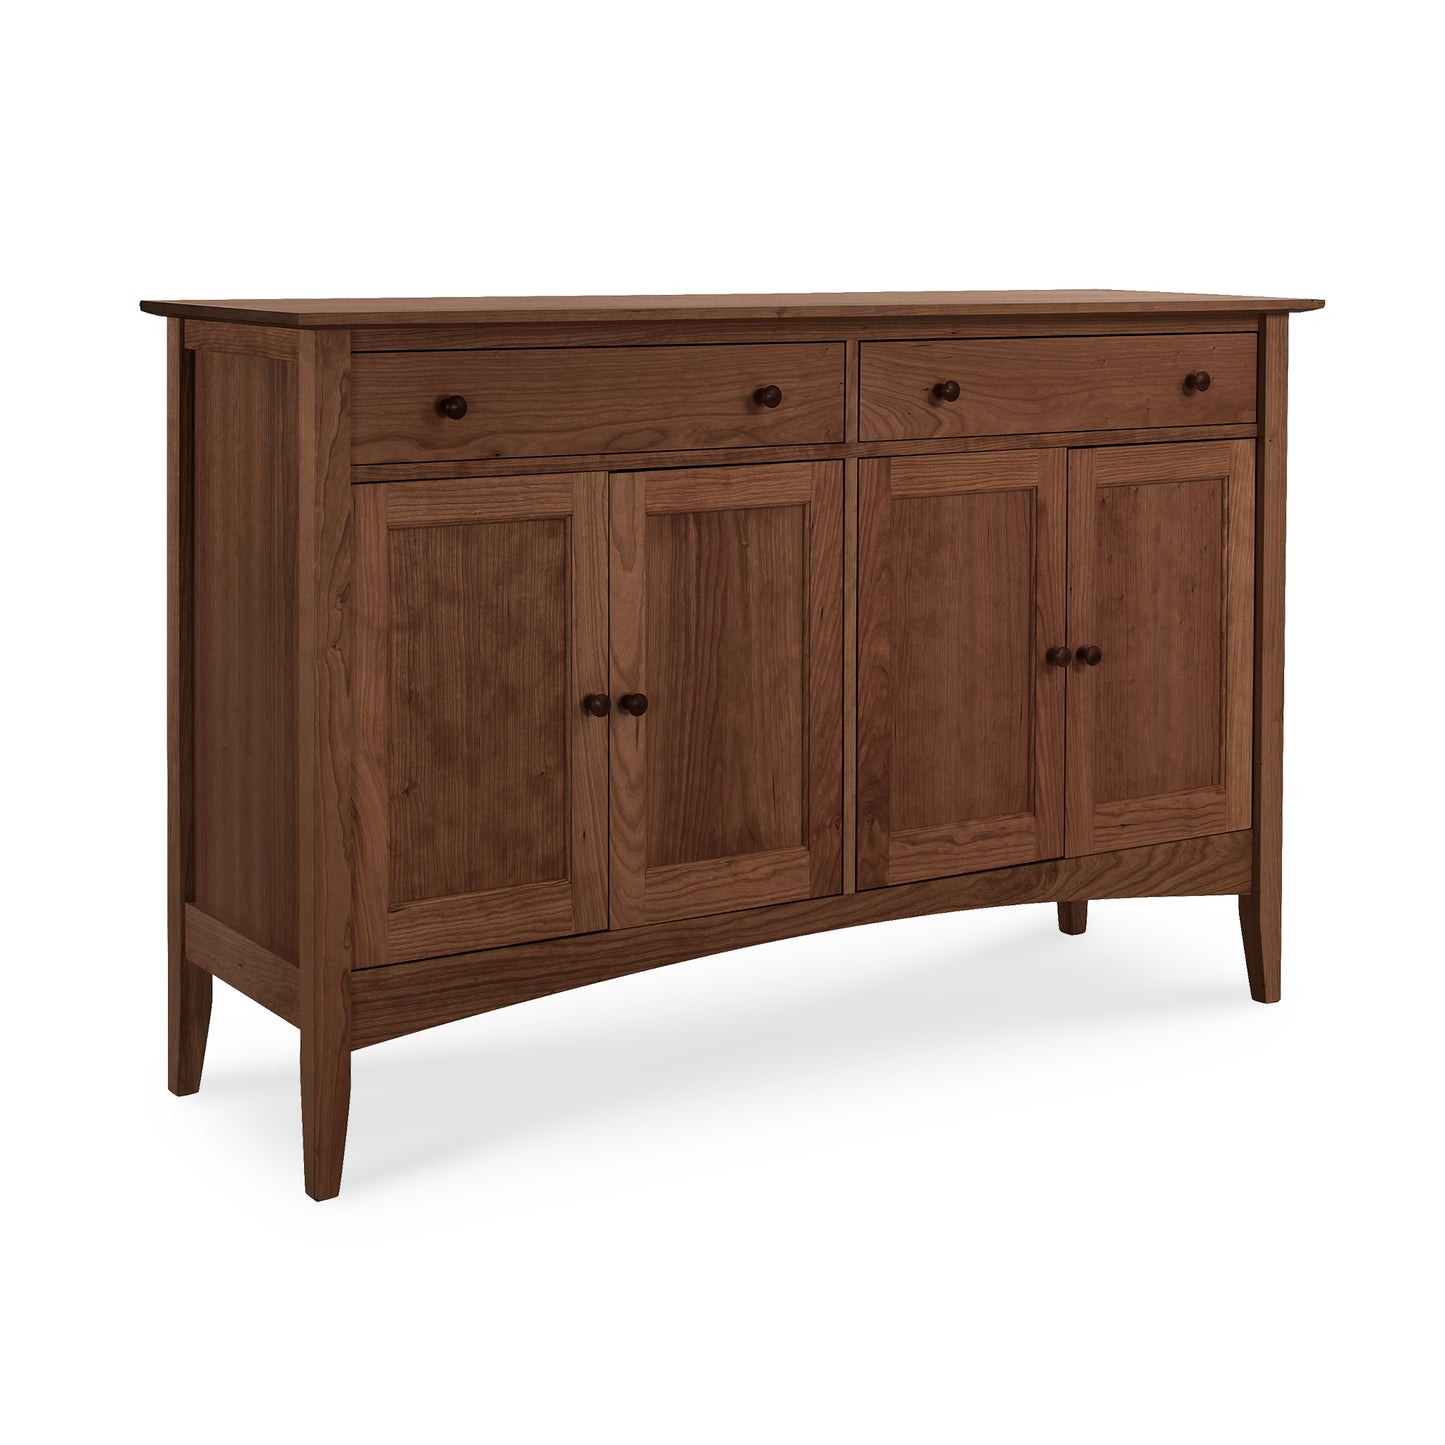 A Maple Corner Woodworks American Shaker Large Sideboard with three drawers and two cabinet doors on a white background.